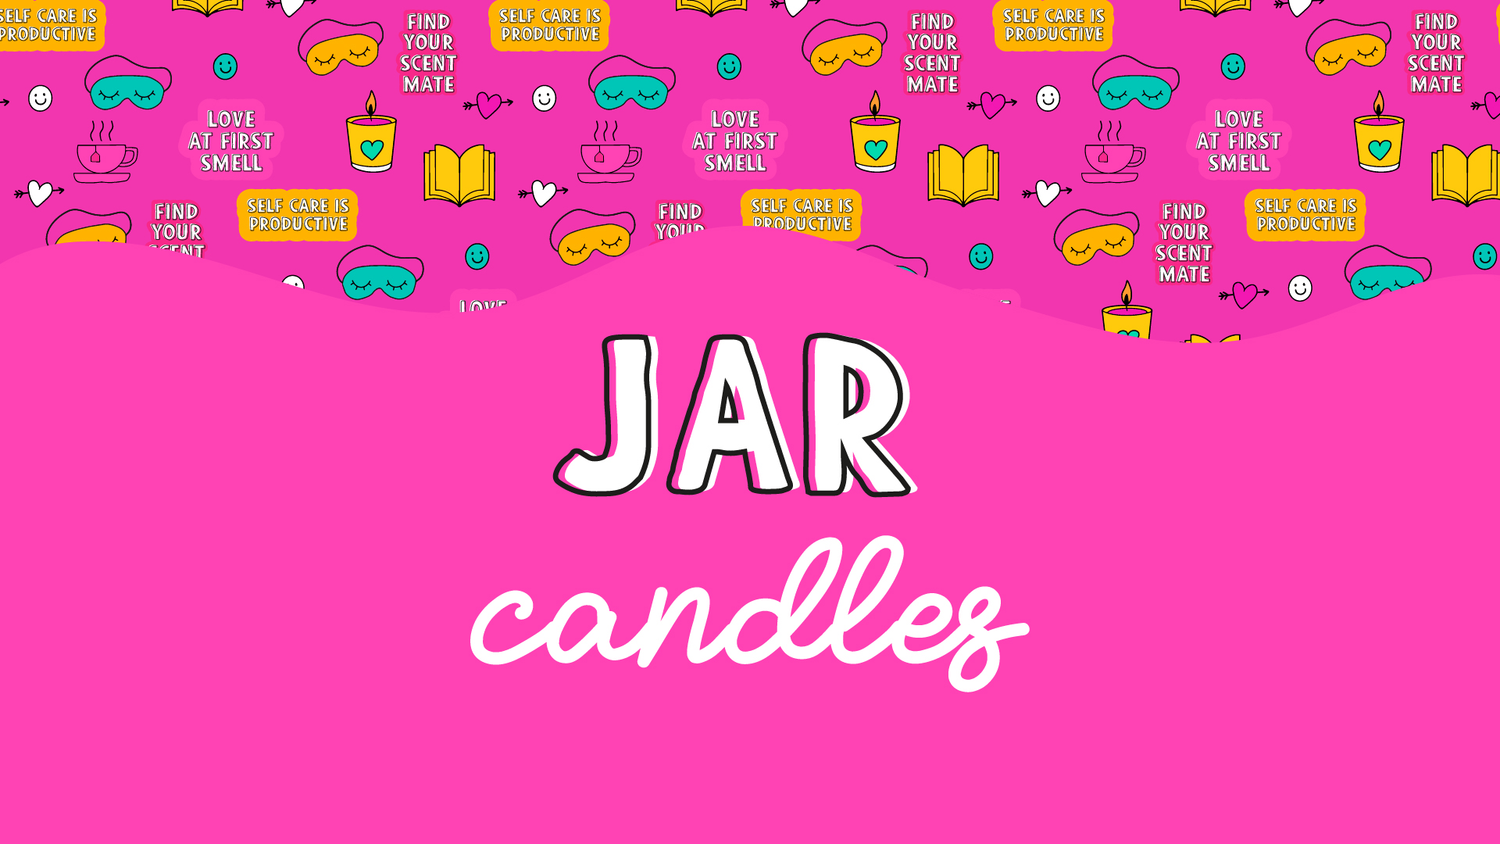 Discover the best self-care scented jar candles for relaxation. Your serenity awaits!